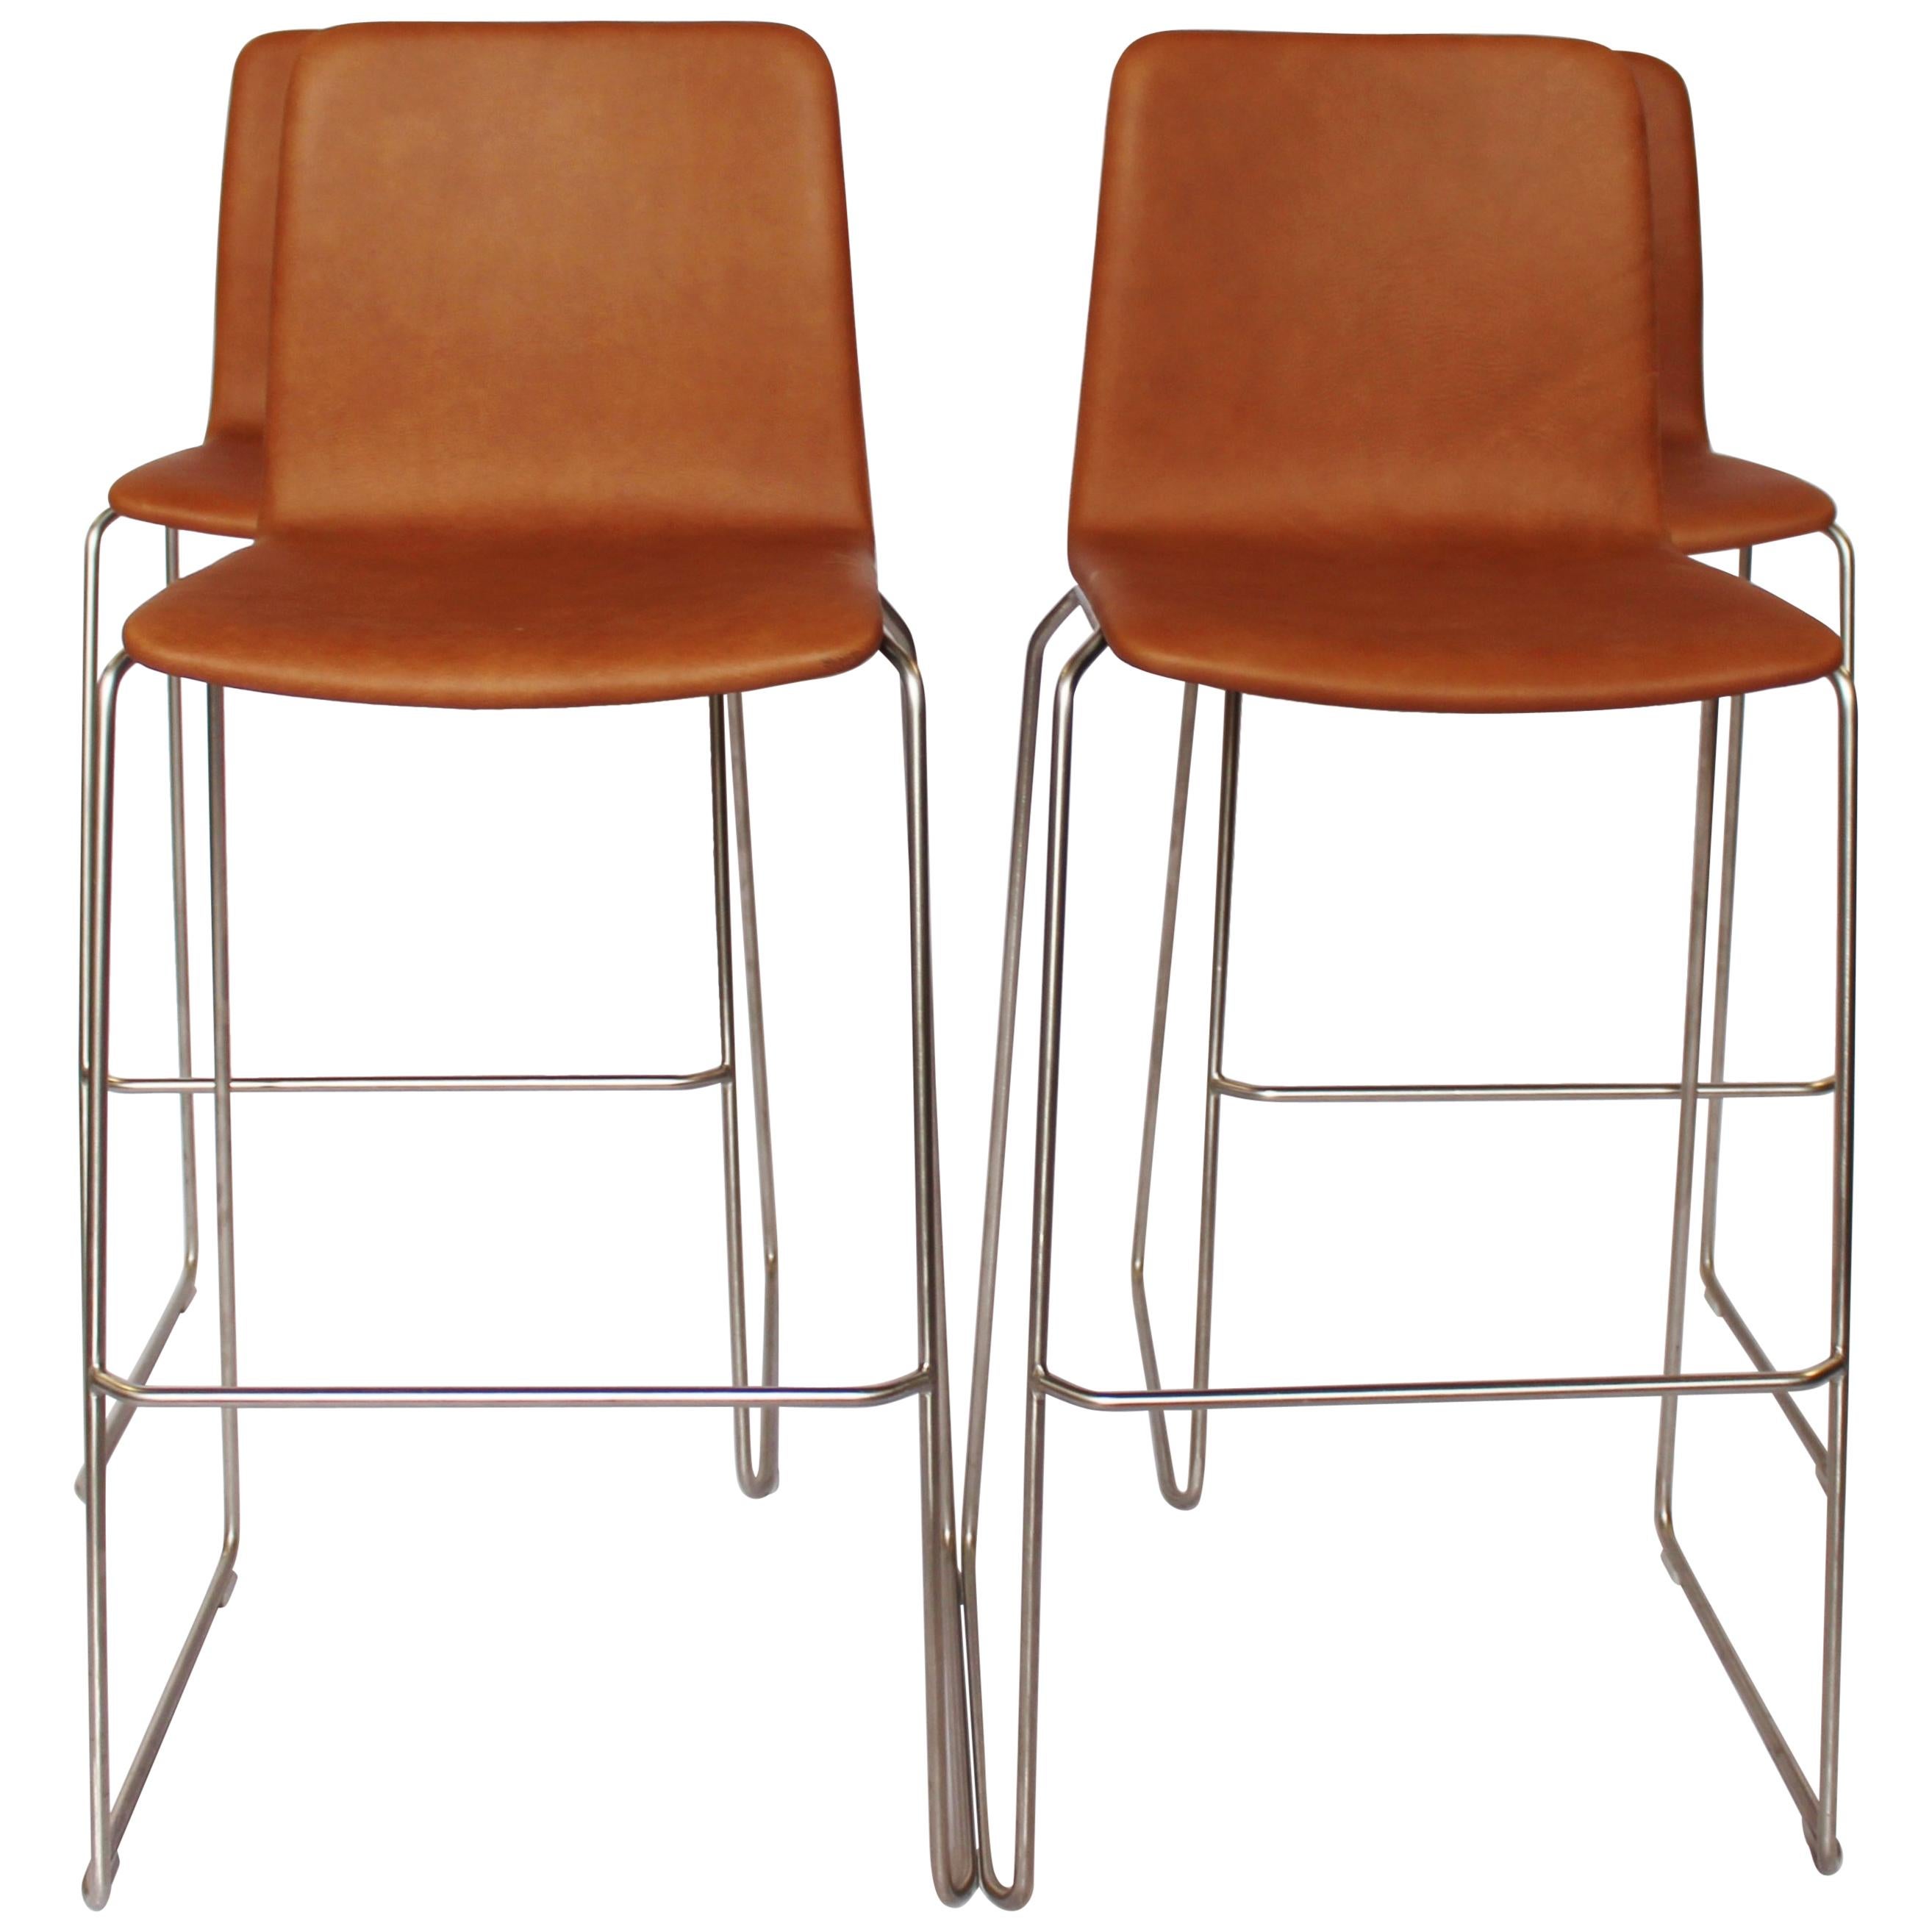 Set of Four Barstools, Model JW01, by Jacob Wagner for HAY